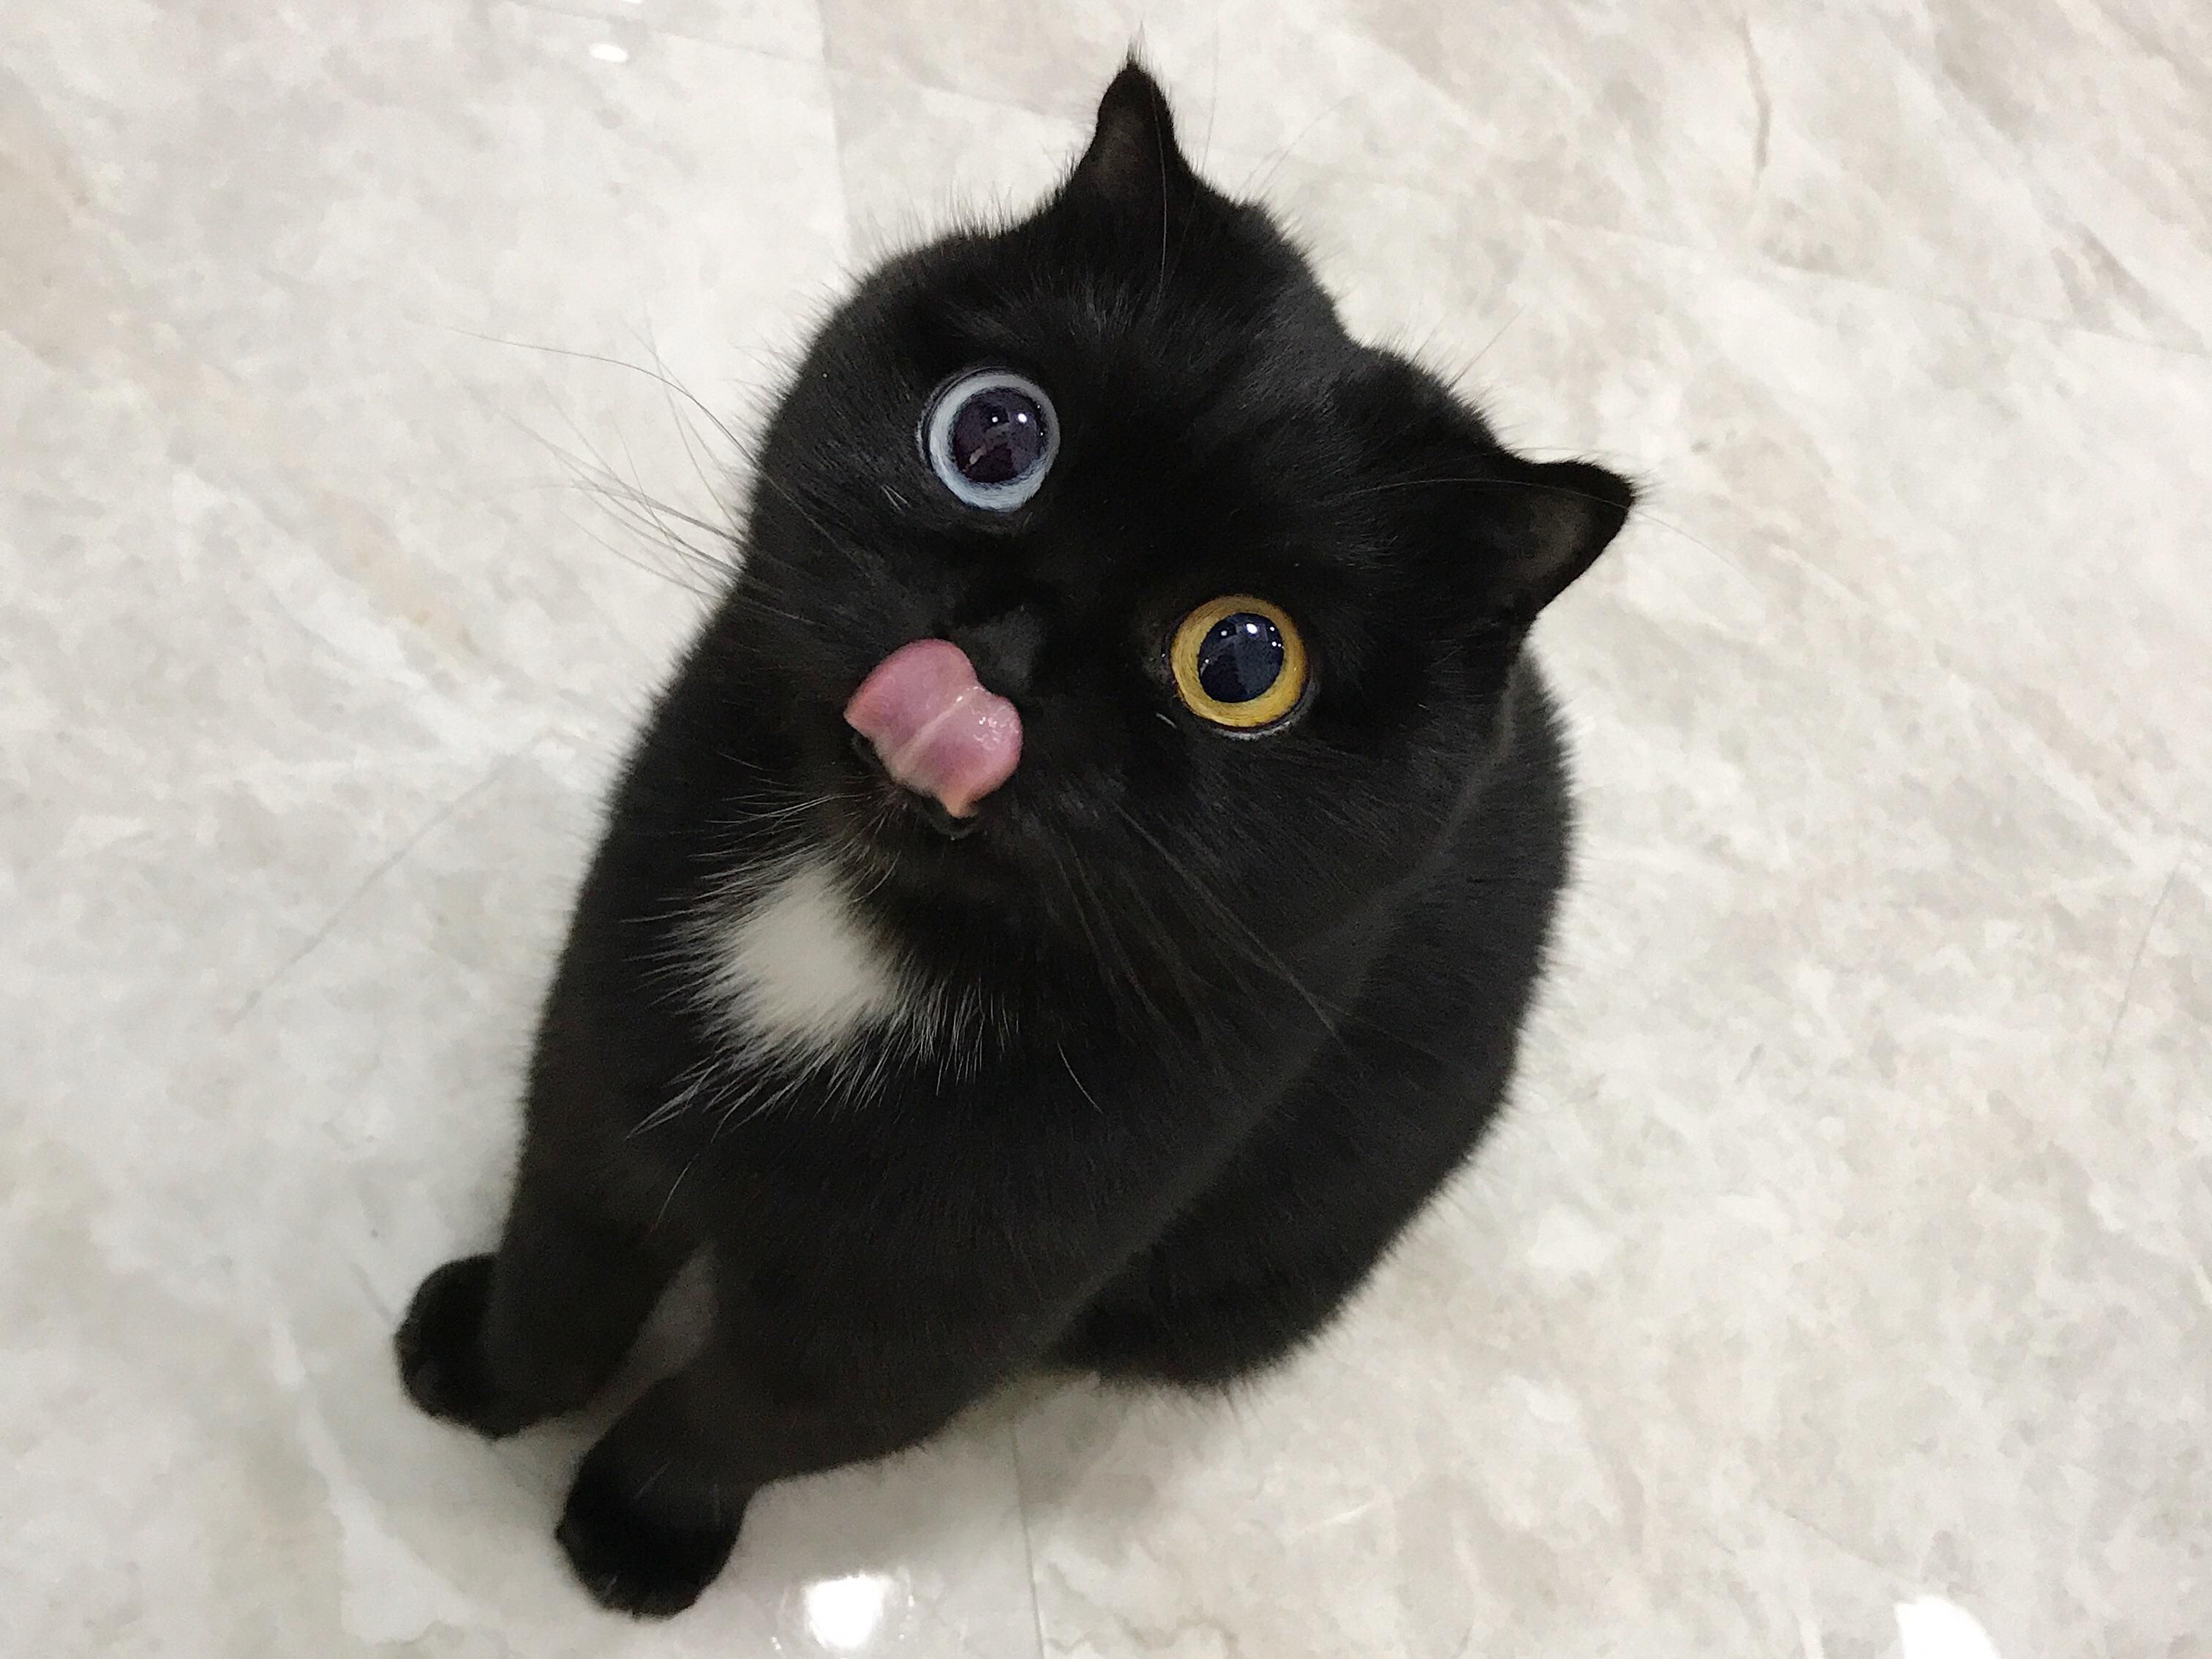 Cat with Heterochromia and a funny face